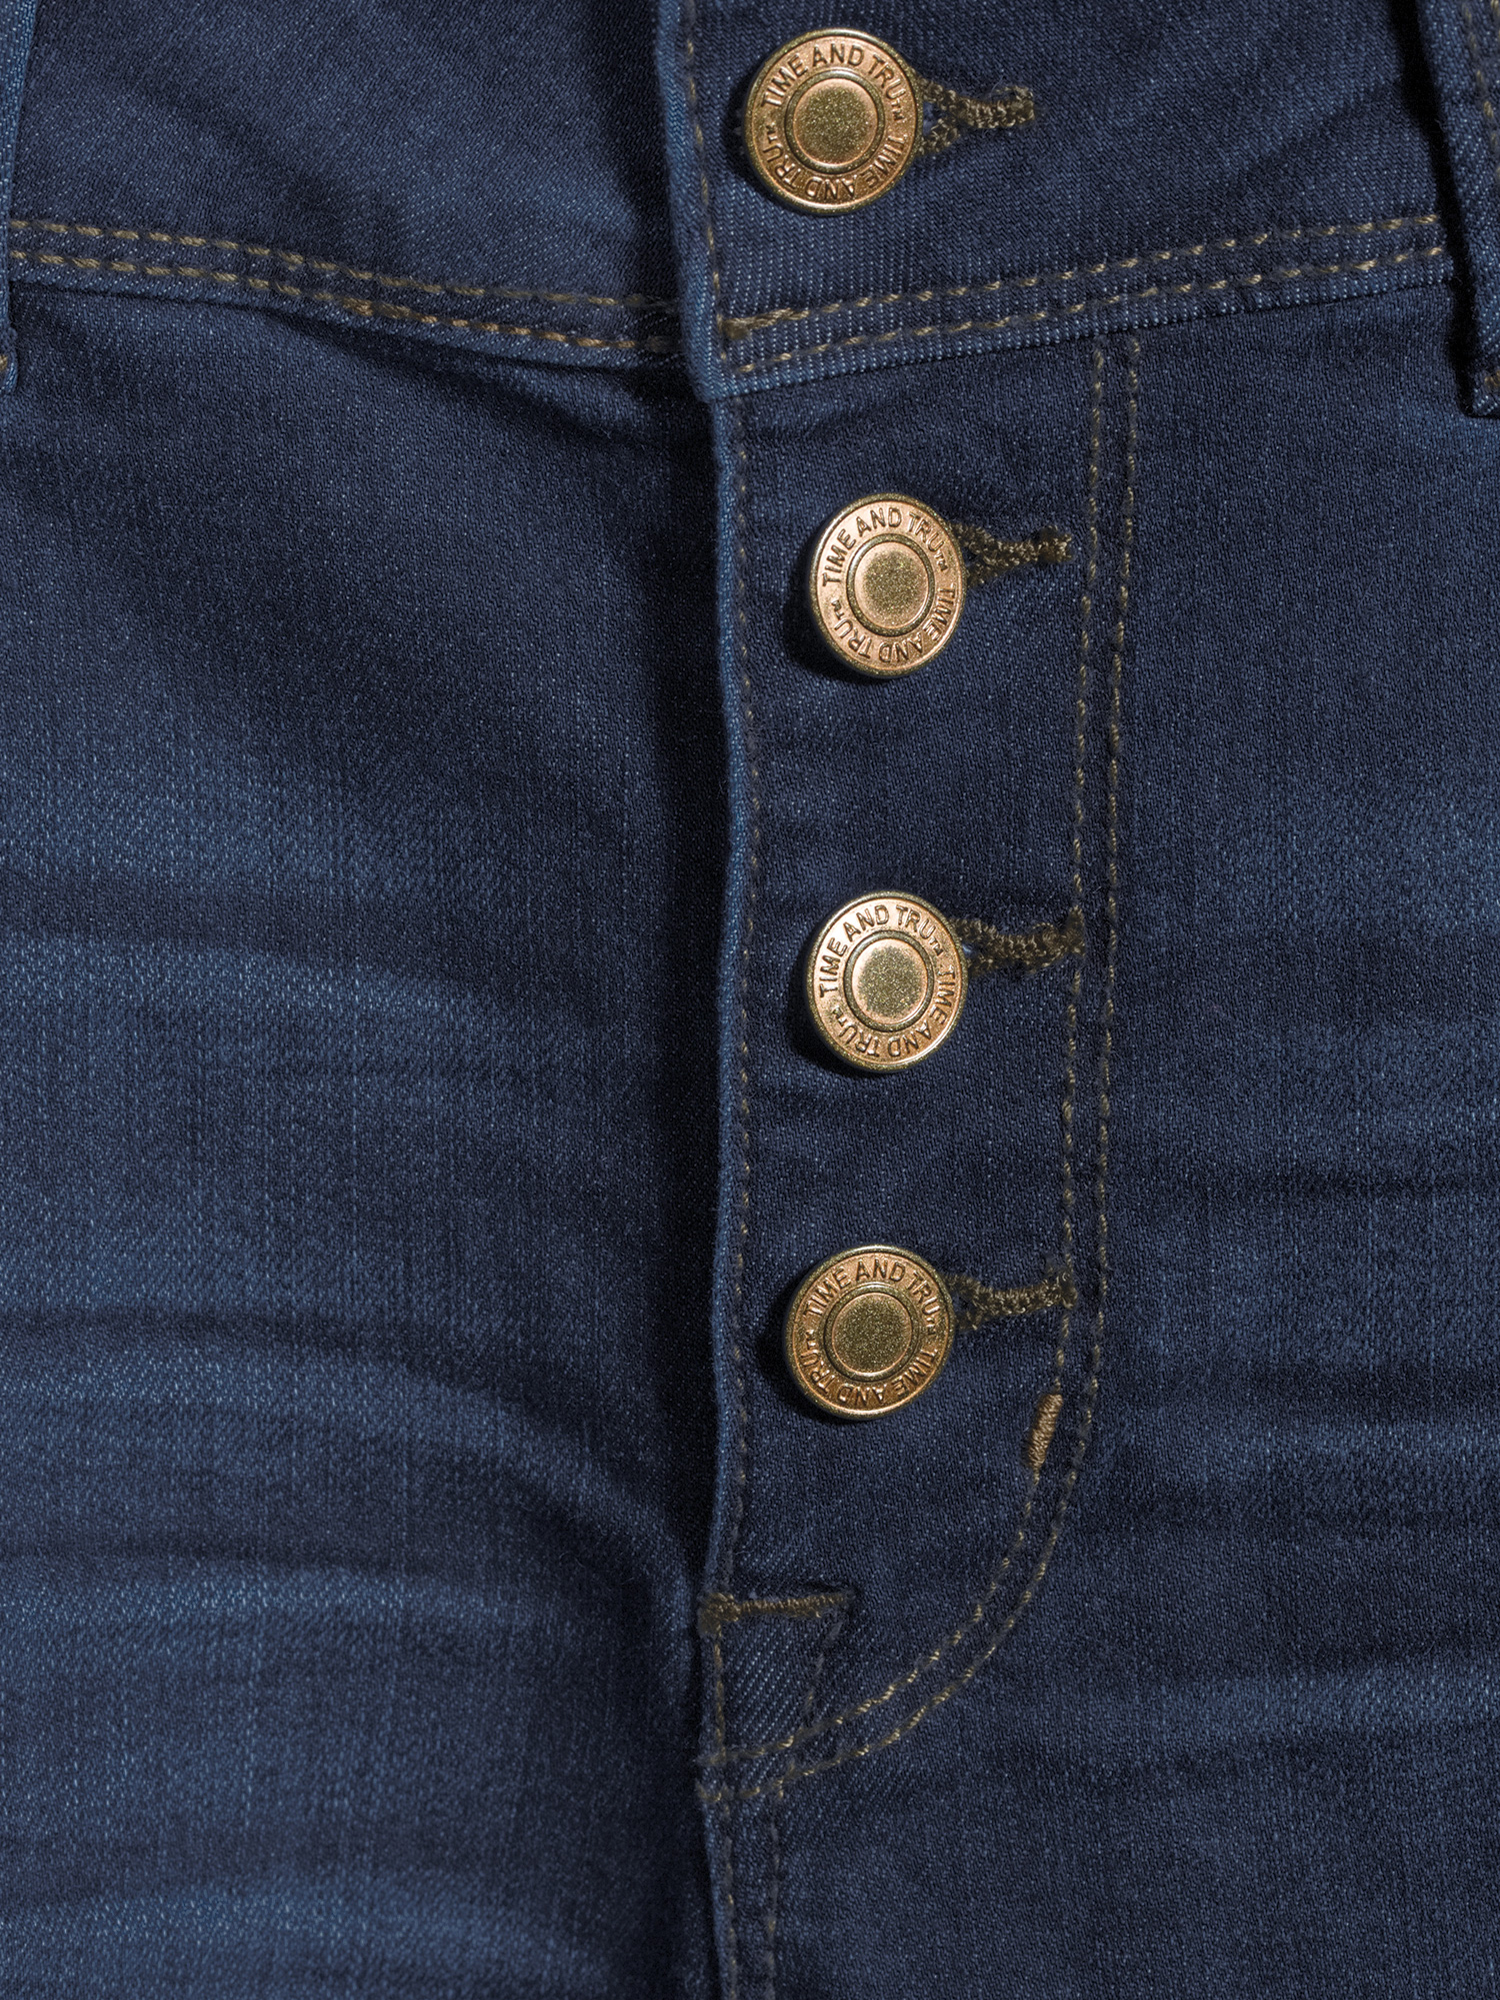 Time and Tru Women's High Rise Button Skinny Jeans - image 5 of 6